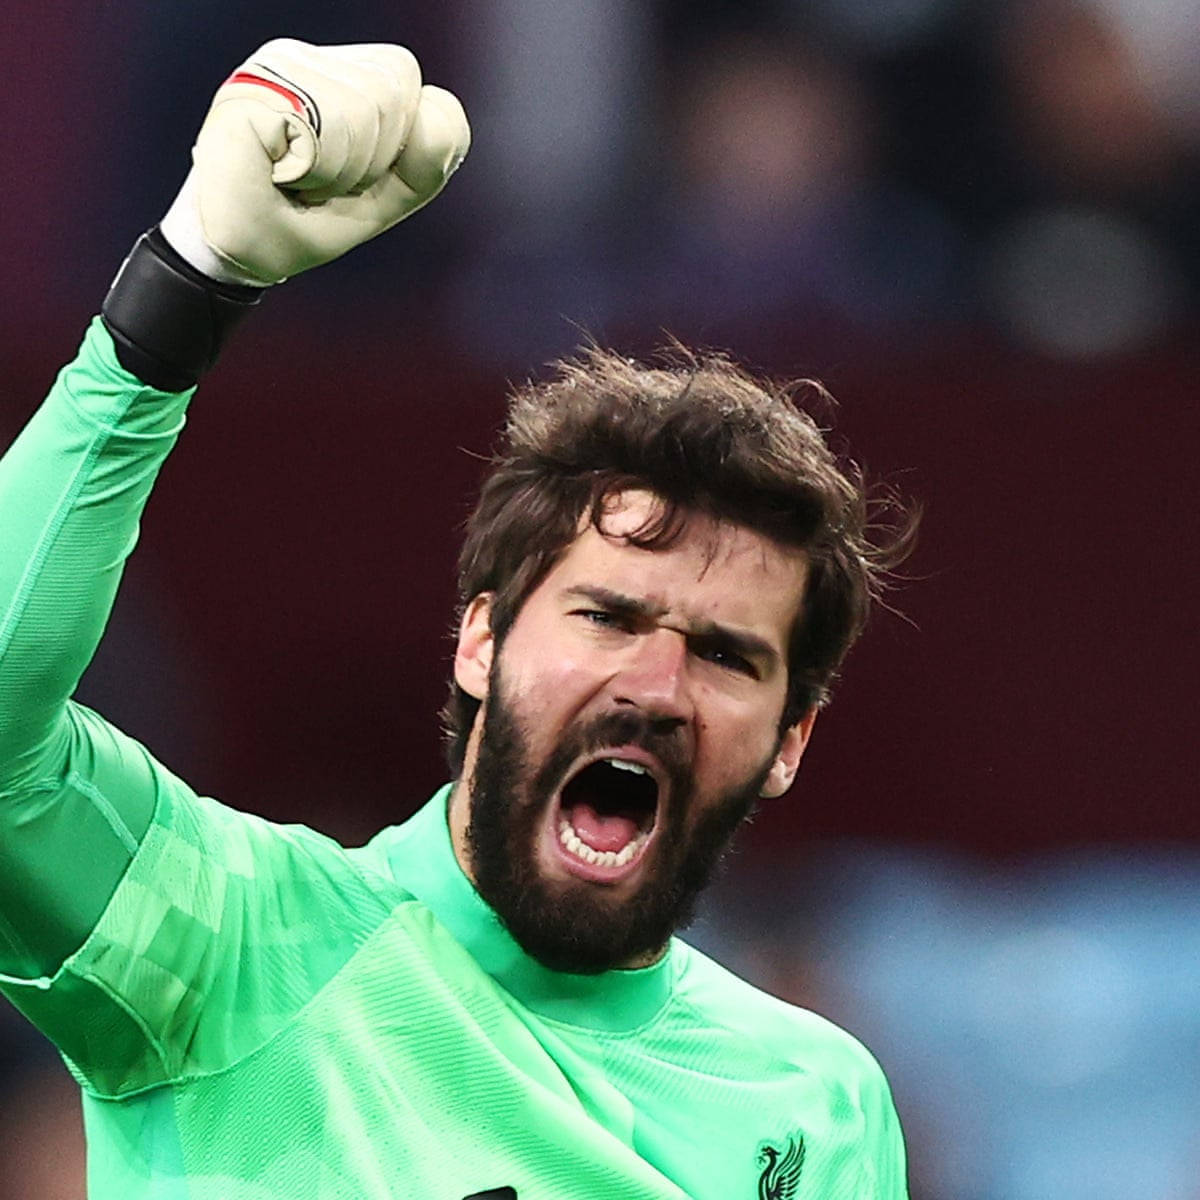 Alisson Becker Shouting With Fist Up Wallpaper